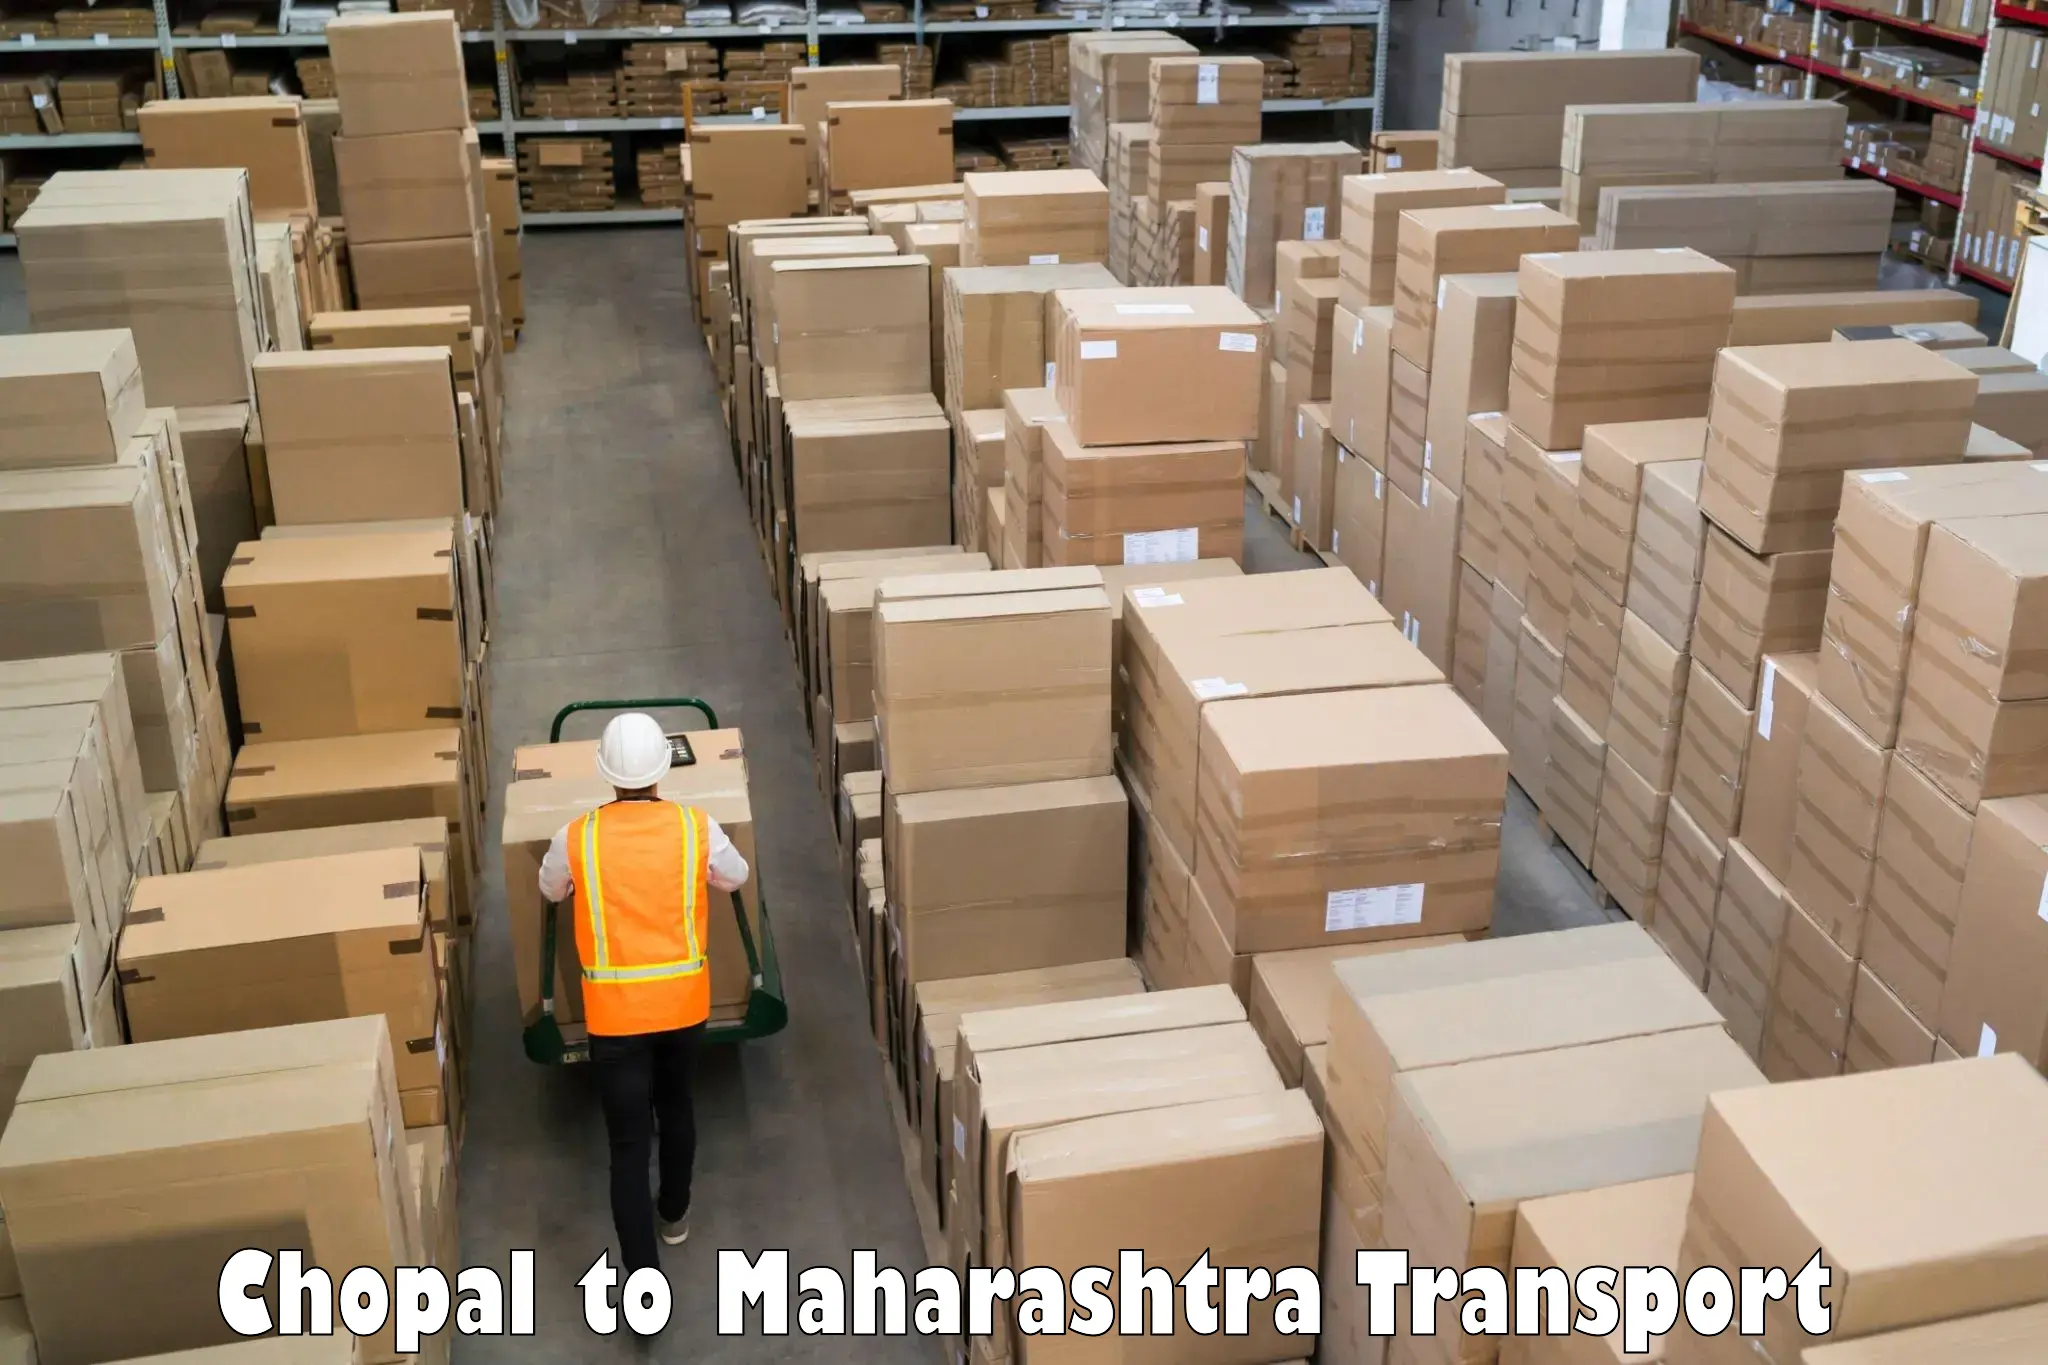 Truck transport companies in India in Chopal to Lasalgaon